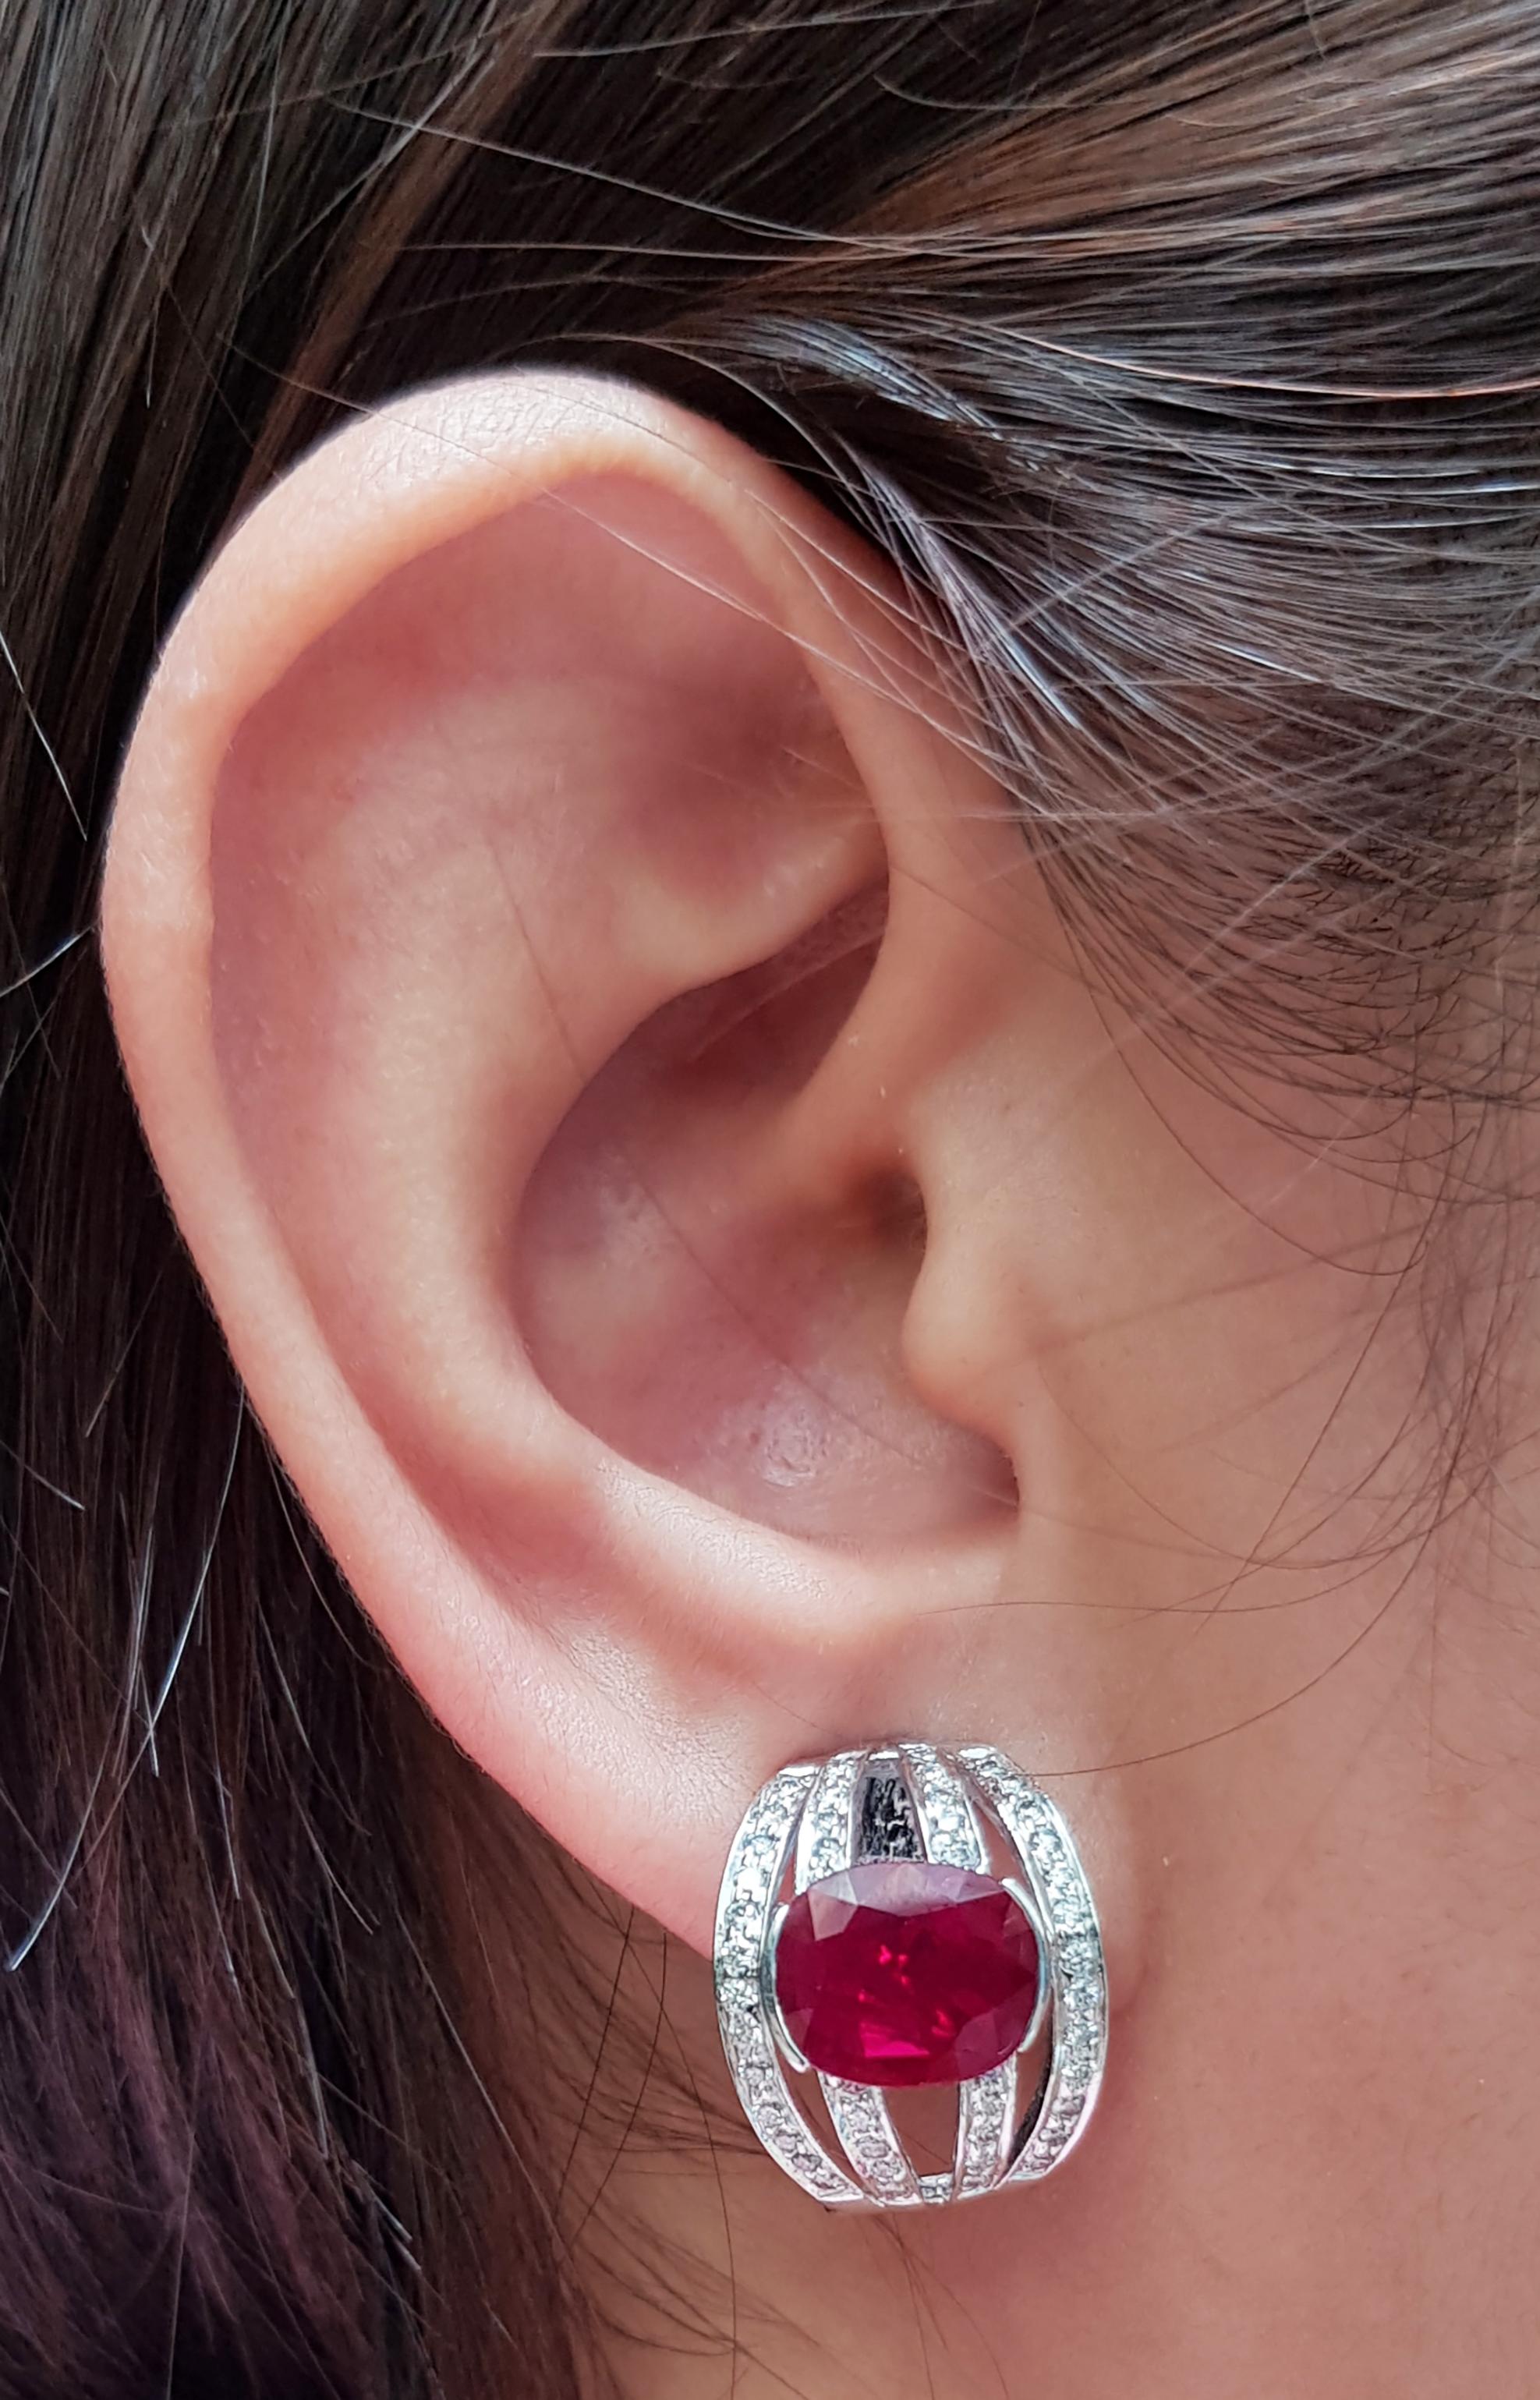 Ruby 4.09 carats with Diamond 0.75 carat Earrings set in 18 Karat White Gold Settings

Width:  1.4 cm 
Length: 2.0 cm
Total Weight: 8.71 grams

